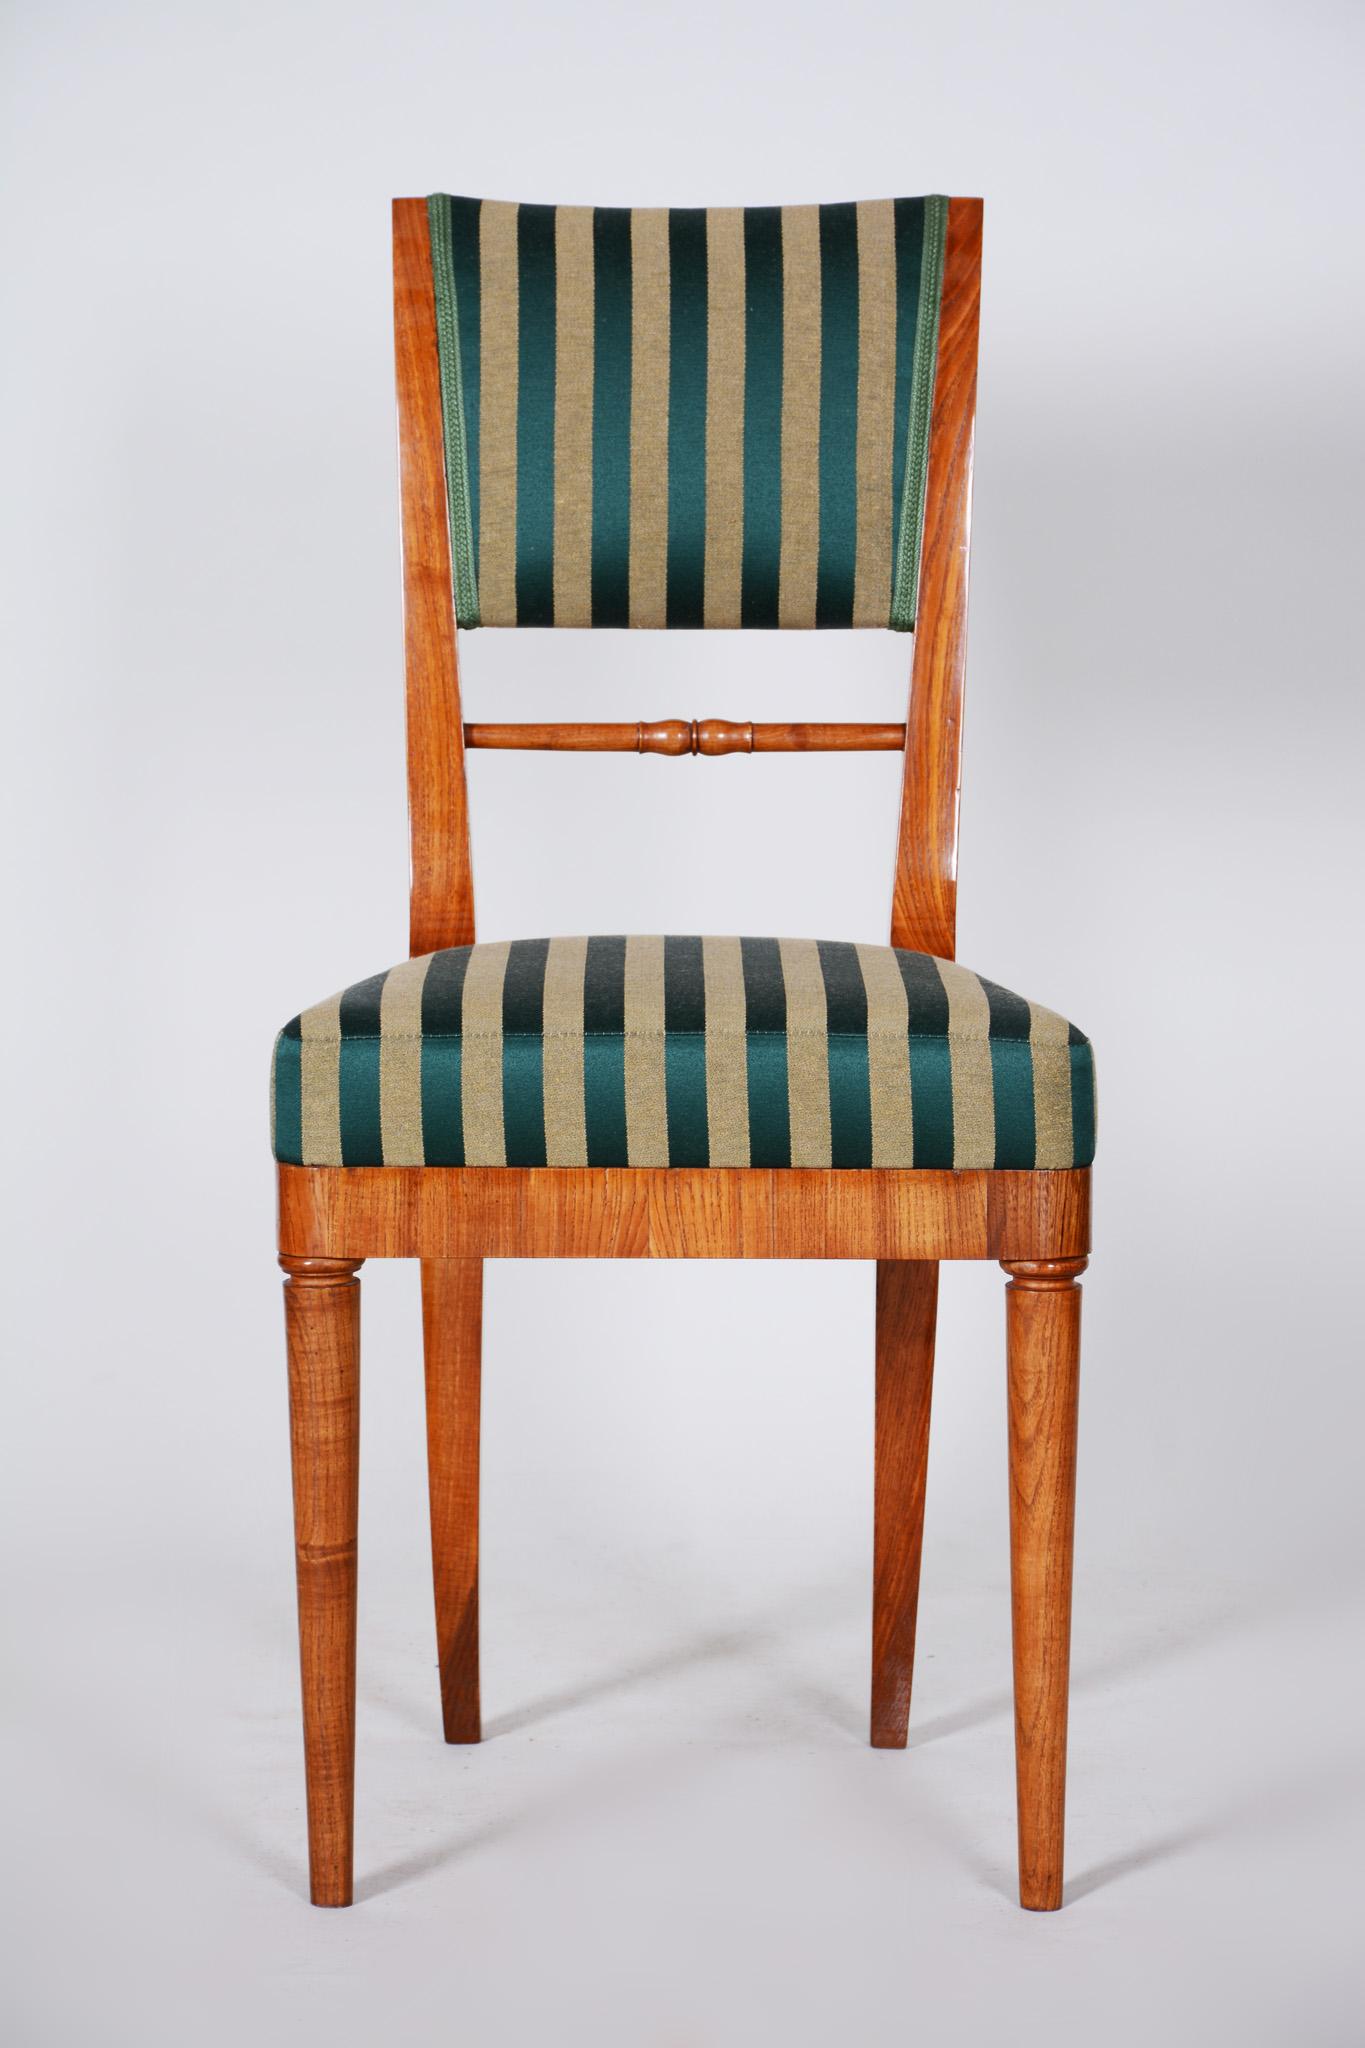 Biedermeier chair
Completely restored, new fabric and upholstery included.
Source: Czechia (Bohemia)
Period: 1830-1839
Shellac-polish.

We guarantee safe a the cheapest air transport from Europe to the whole world within 7 days.
The price is the